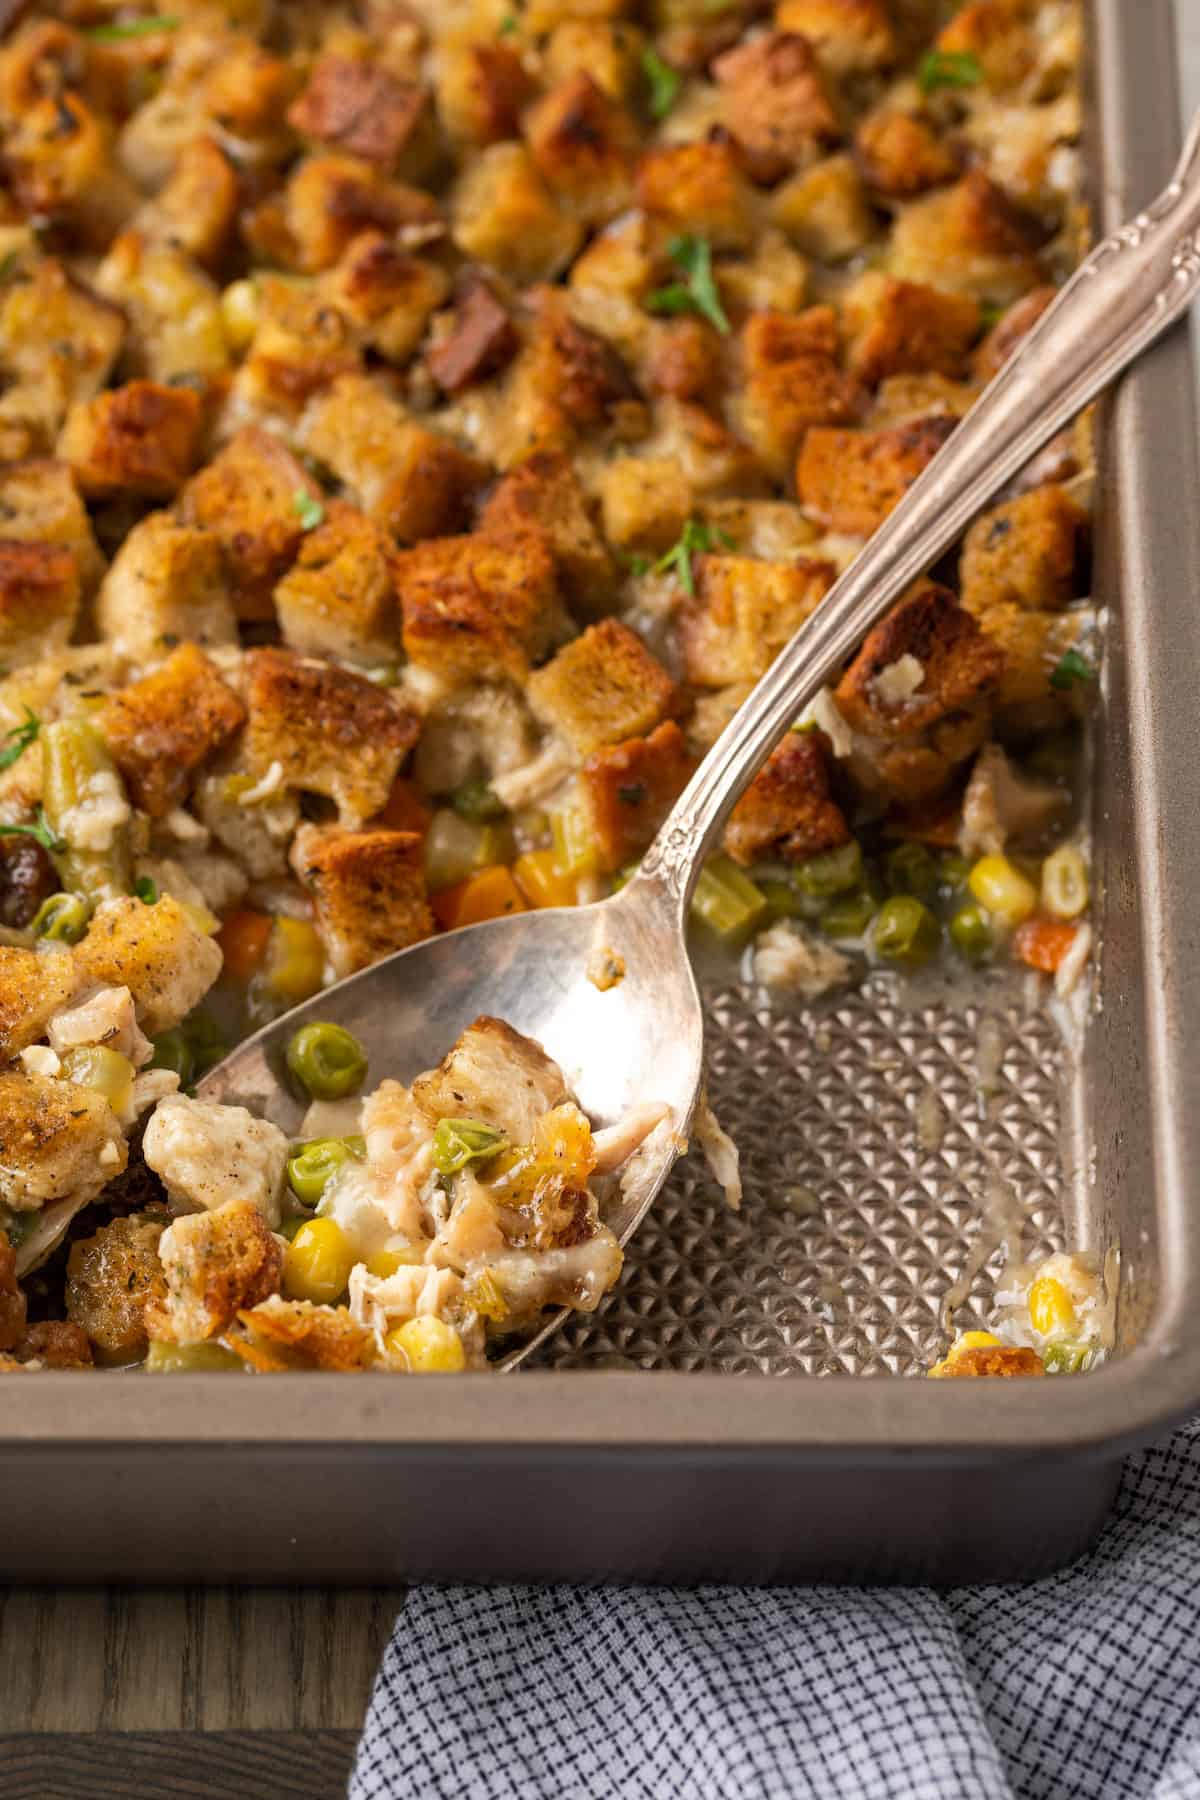 A spoon scoops out chicken and stuffing casserole.